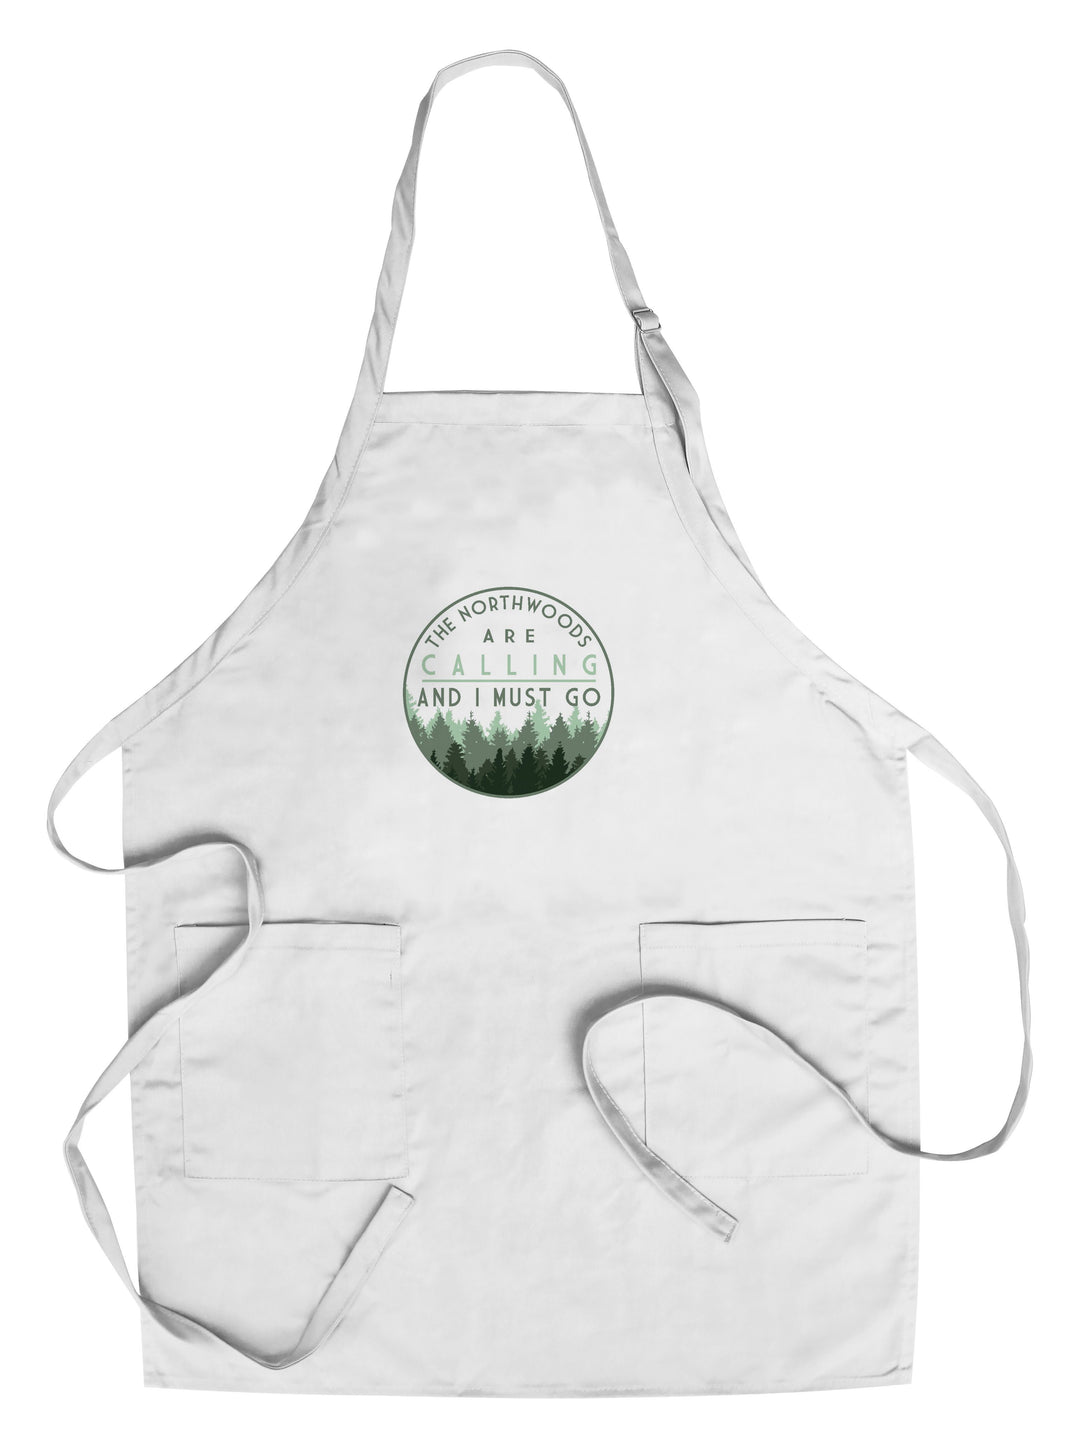 Northwoods, Wisconsin, Northwoods Calling & I Must Go, Pine Trees, Contour, Lantern Press Artwork, Towels and Aprons Kitchen Lantern Press Chef's Apron 